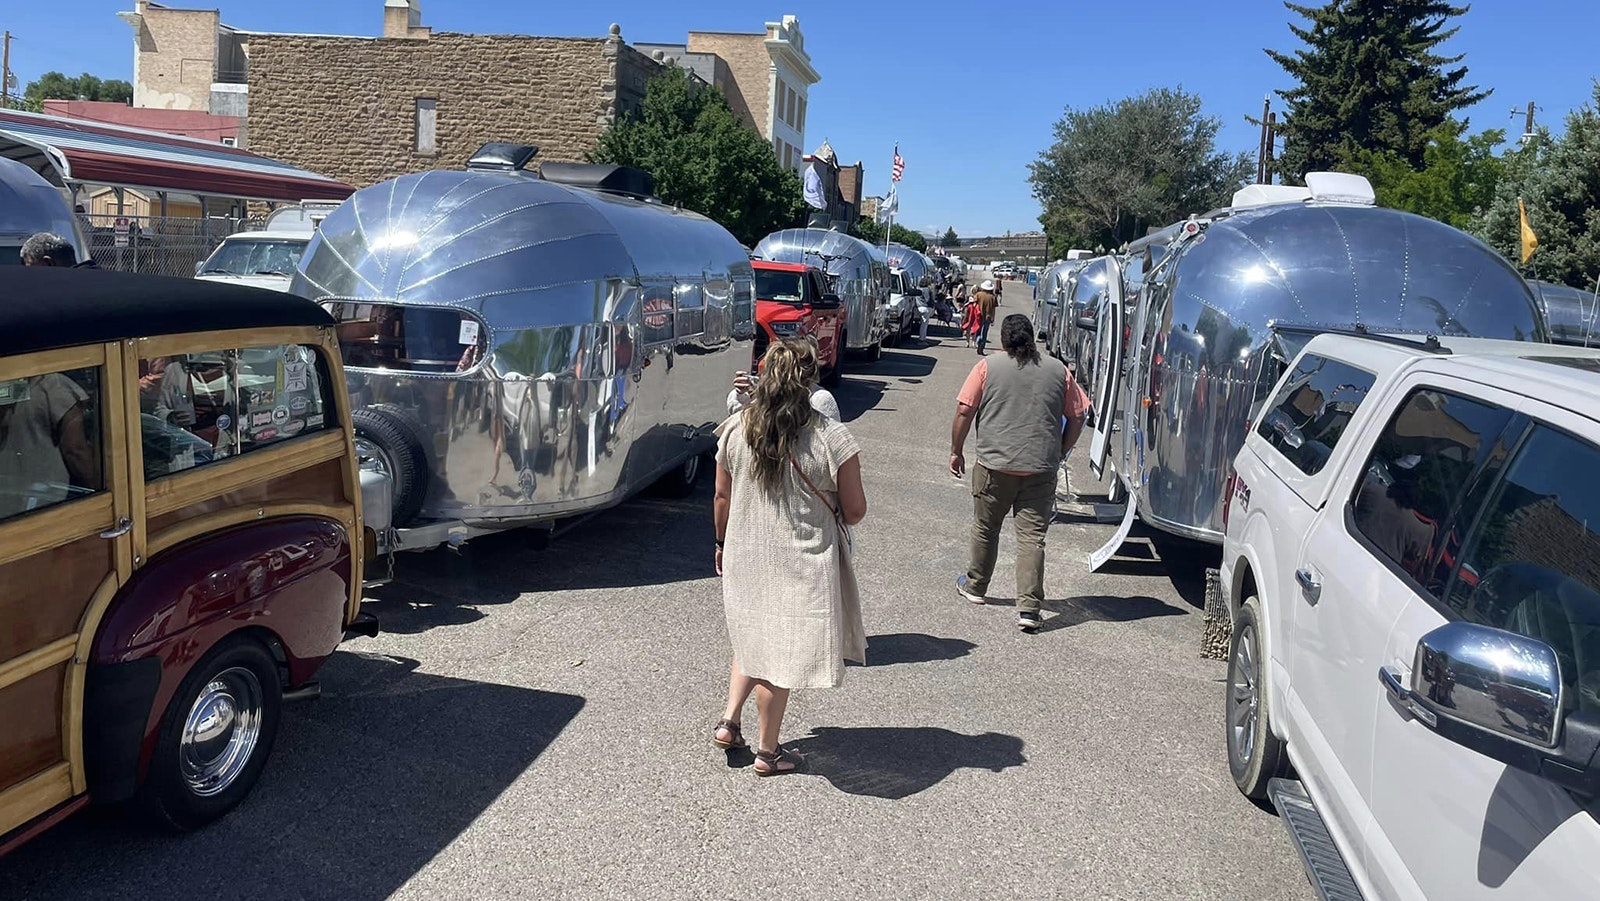 A seemingly endless line of silver Airstreams on display in Rock Springs.